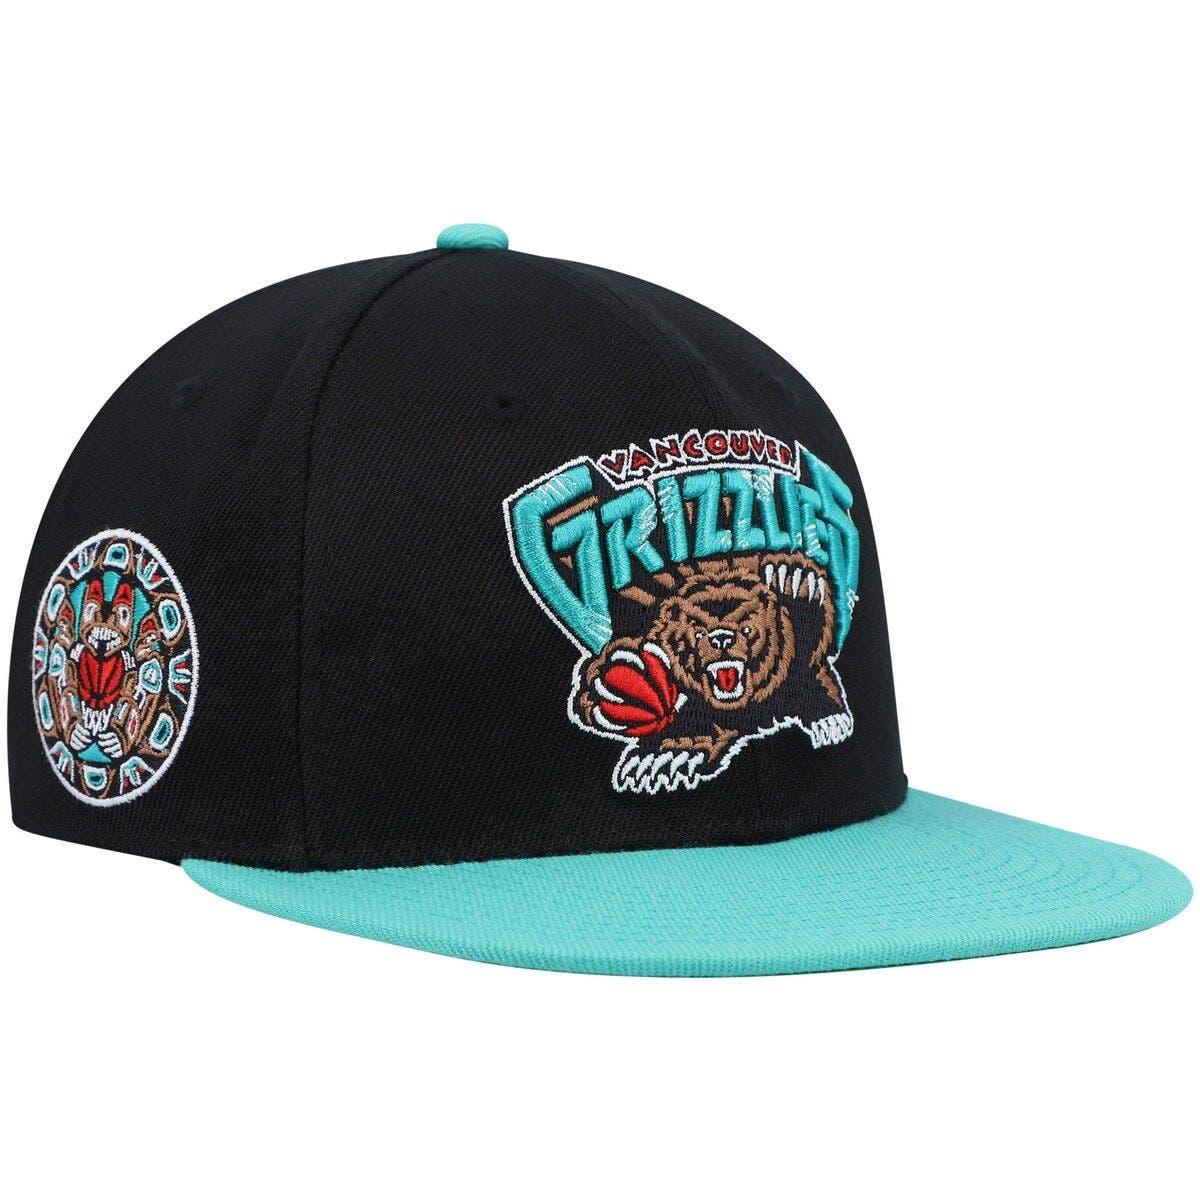 Mitchell & Ness Men's x Lids White, Red Vancouver Grizzlies Hardwood  Classics Reload 3.0 Snapback Hat